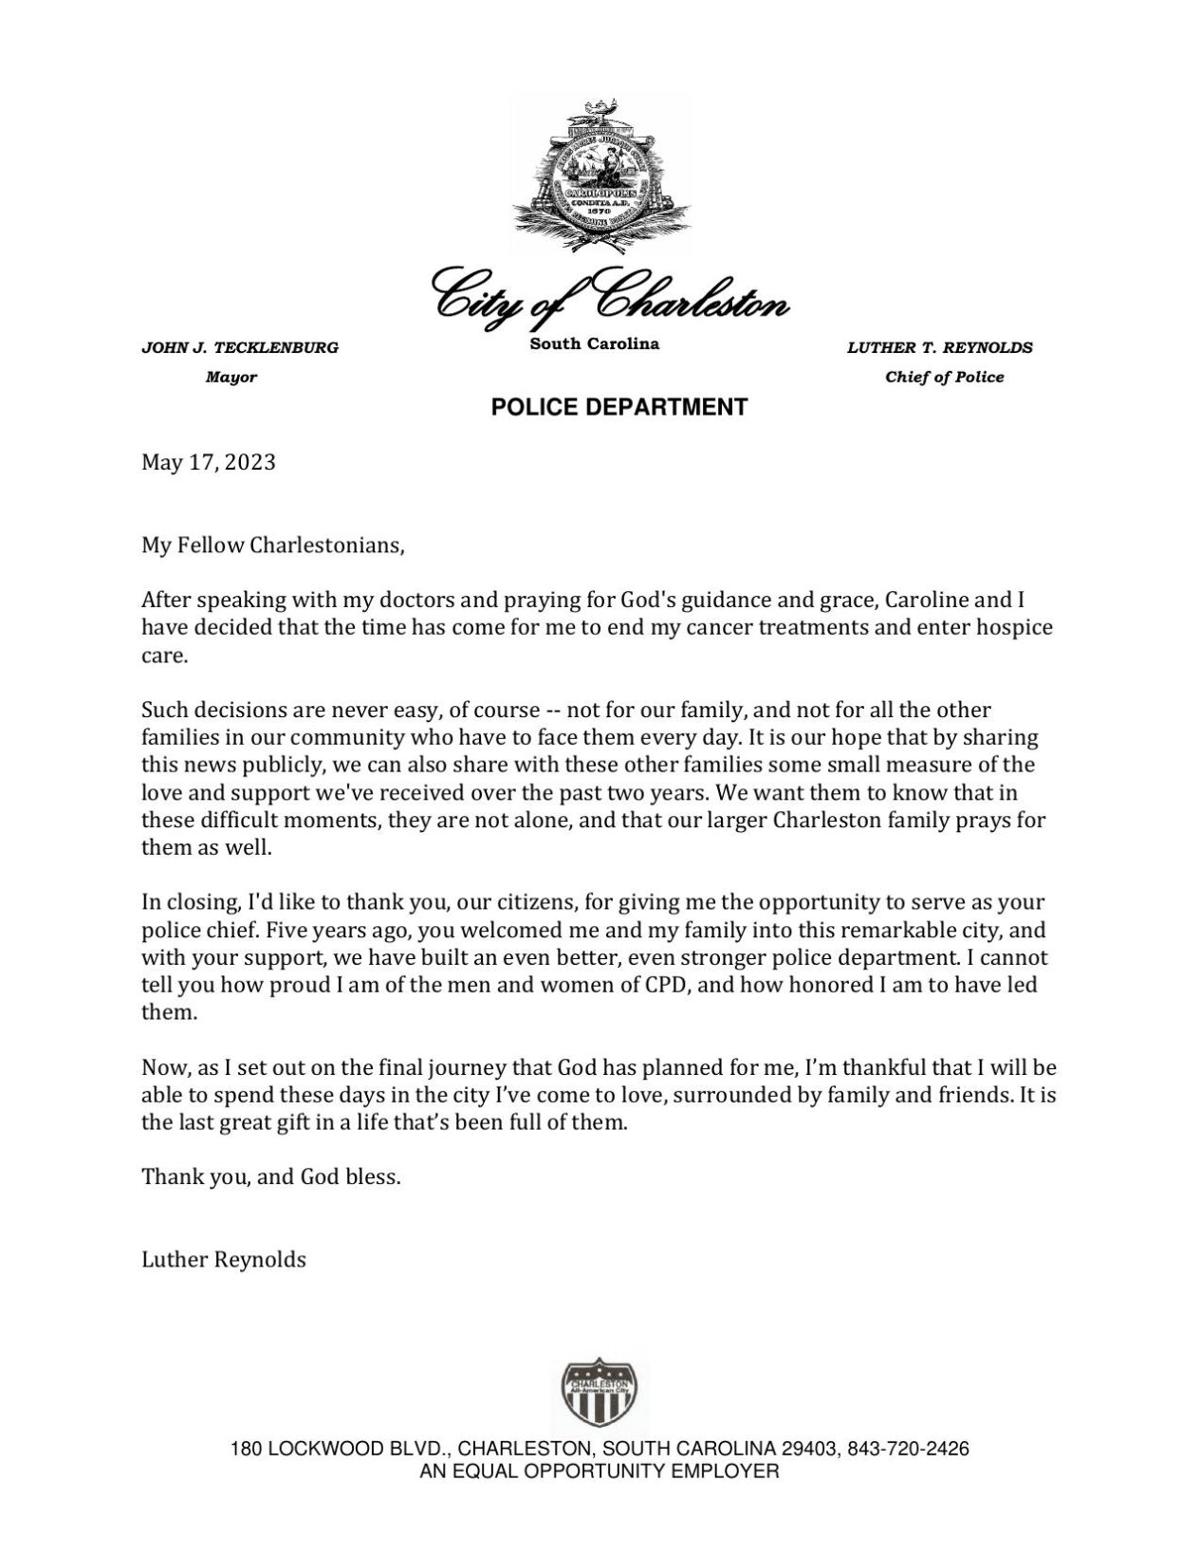 An open letter from Charleston Police Chief Luther Reynolds